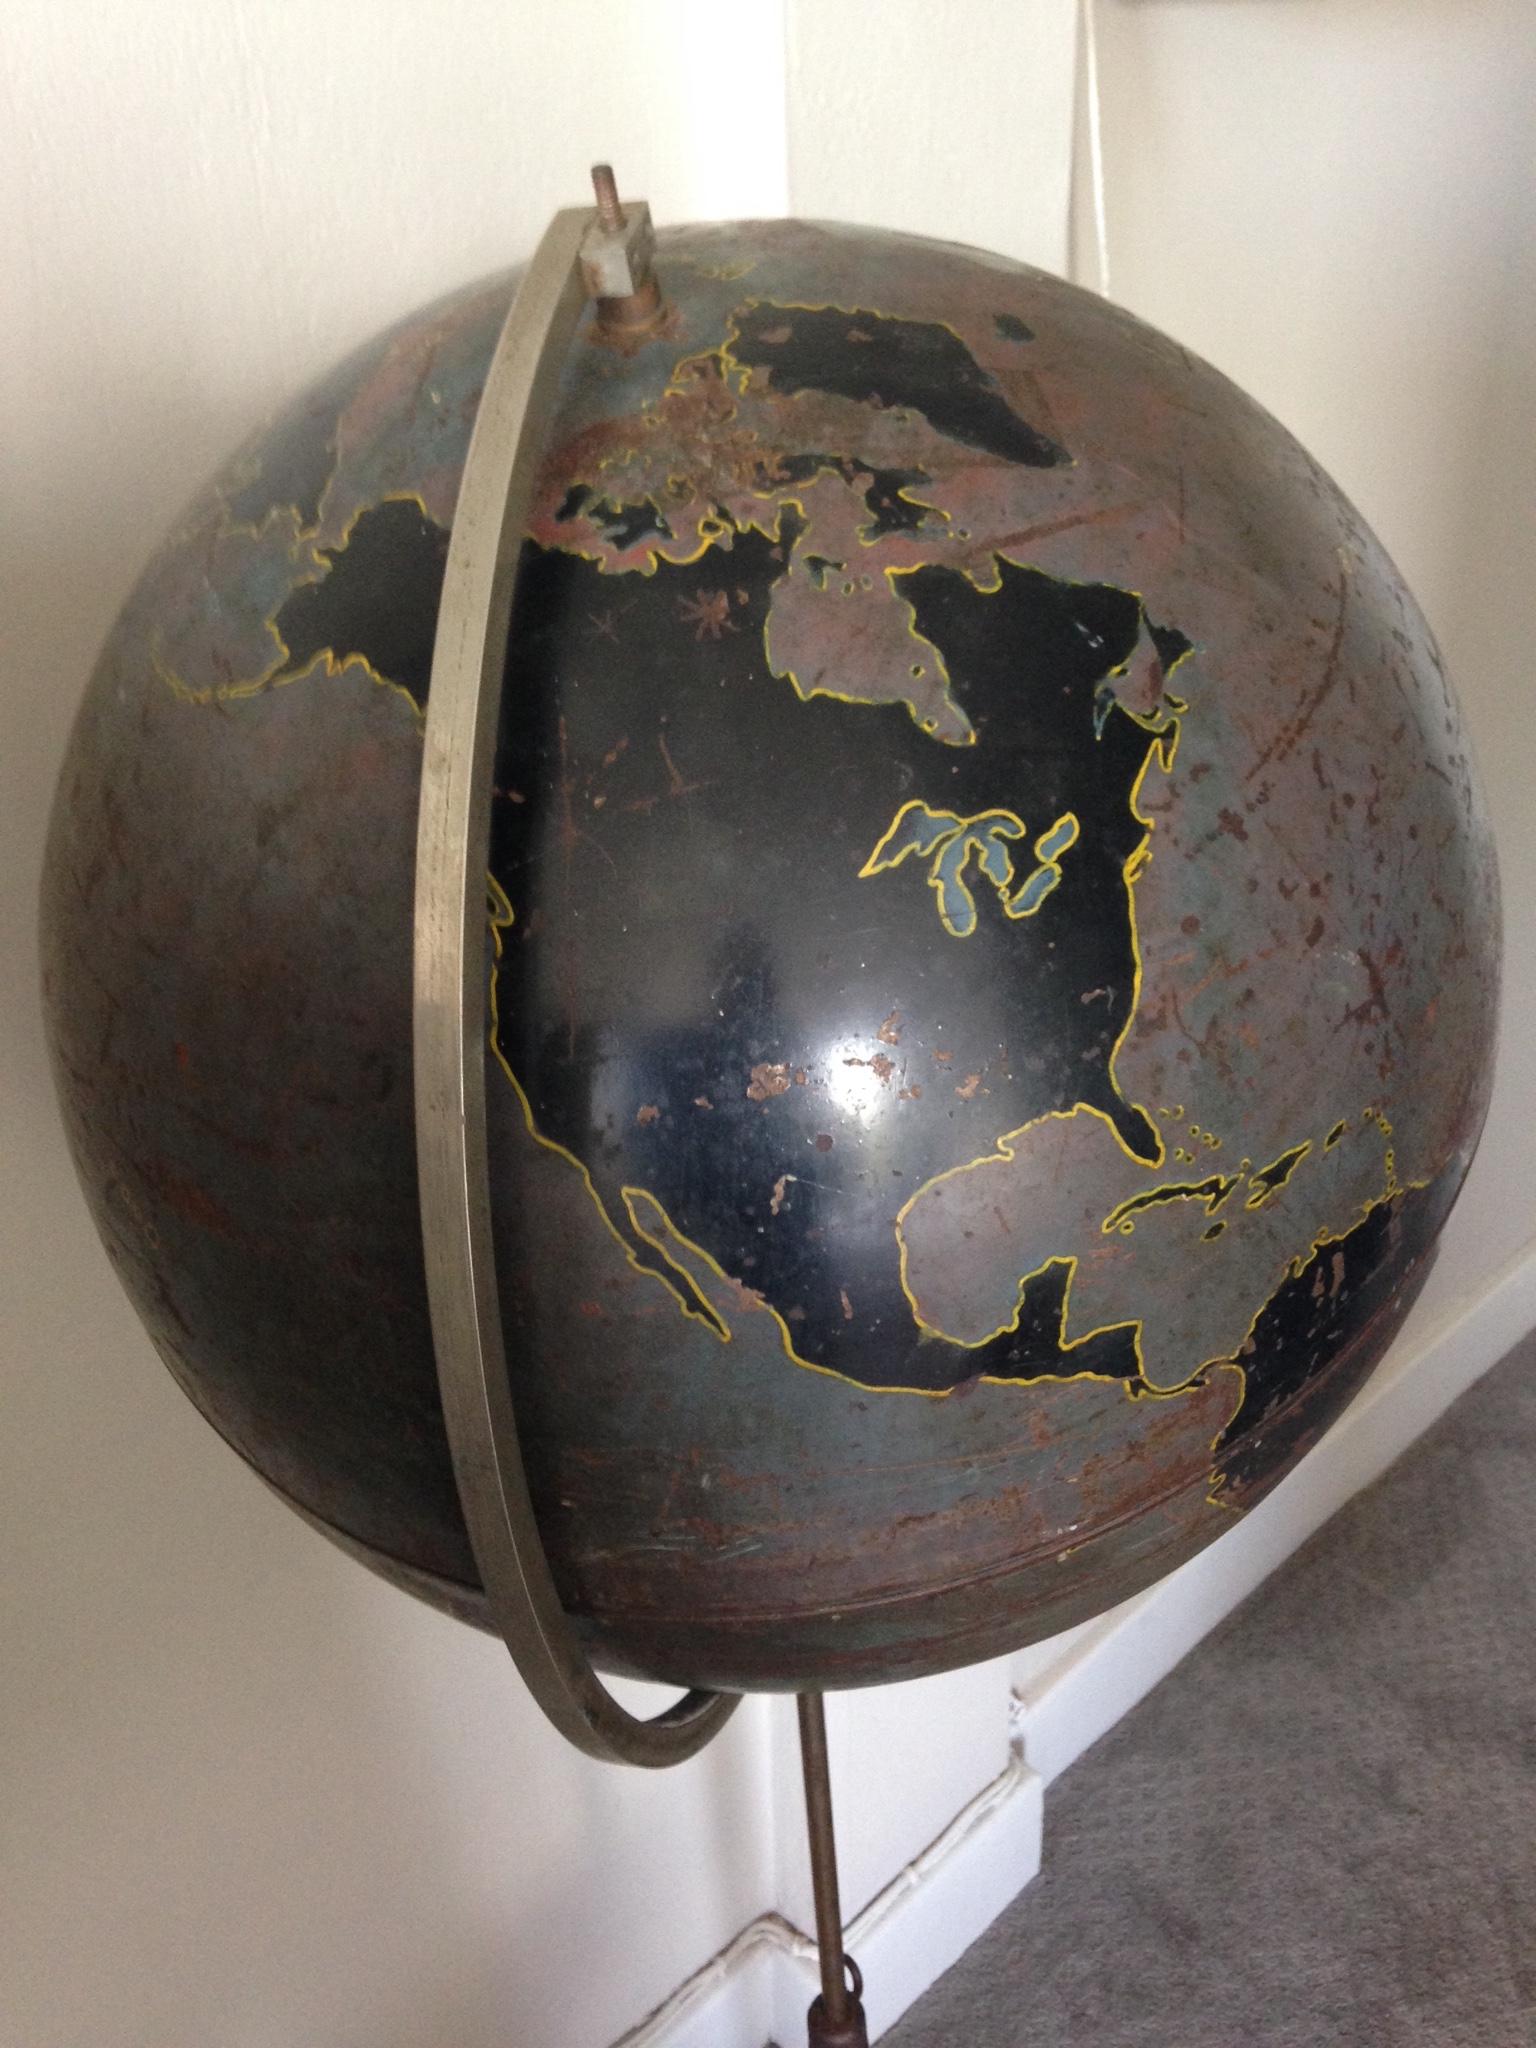 Globe of steel with heavy, cast iron base by Denoyer Geppert, circa 1920s. Used as aviation training tool by the military, hence lack of identifying information on the land masses. Beautifully worn patina of browns and blacks mounted on adjustable